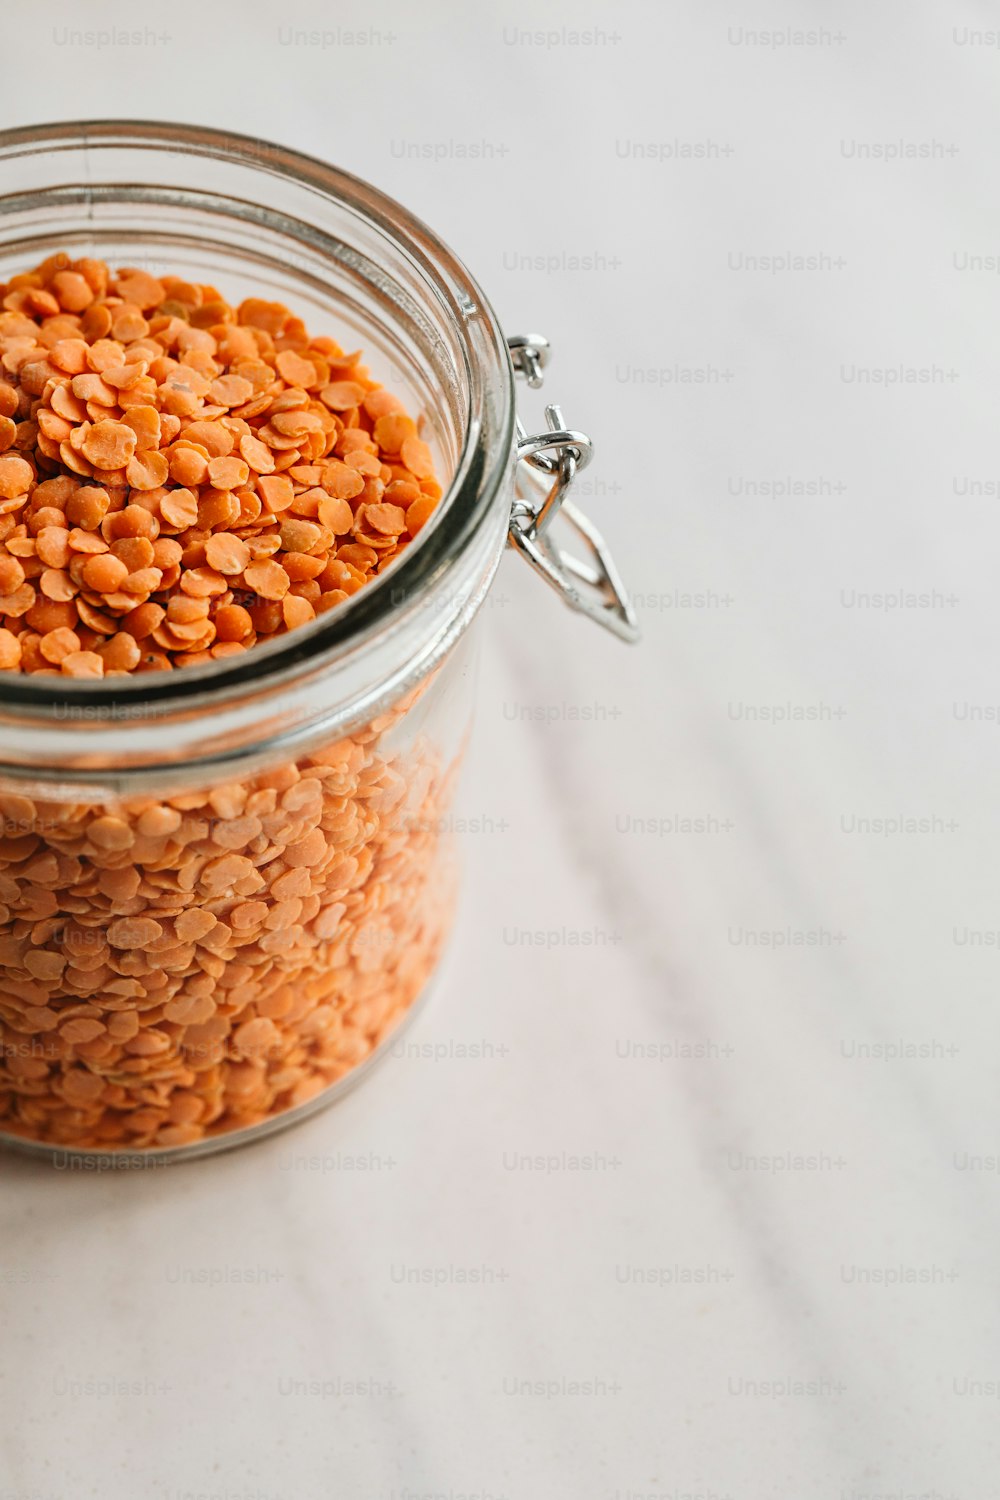 a glass jar filled with red lentils on a table